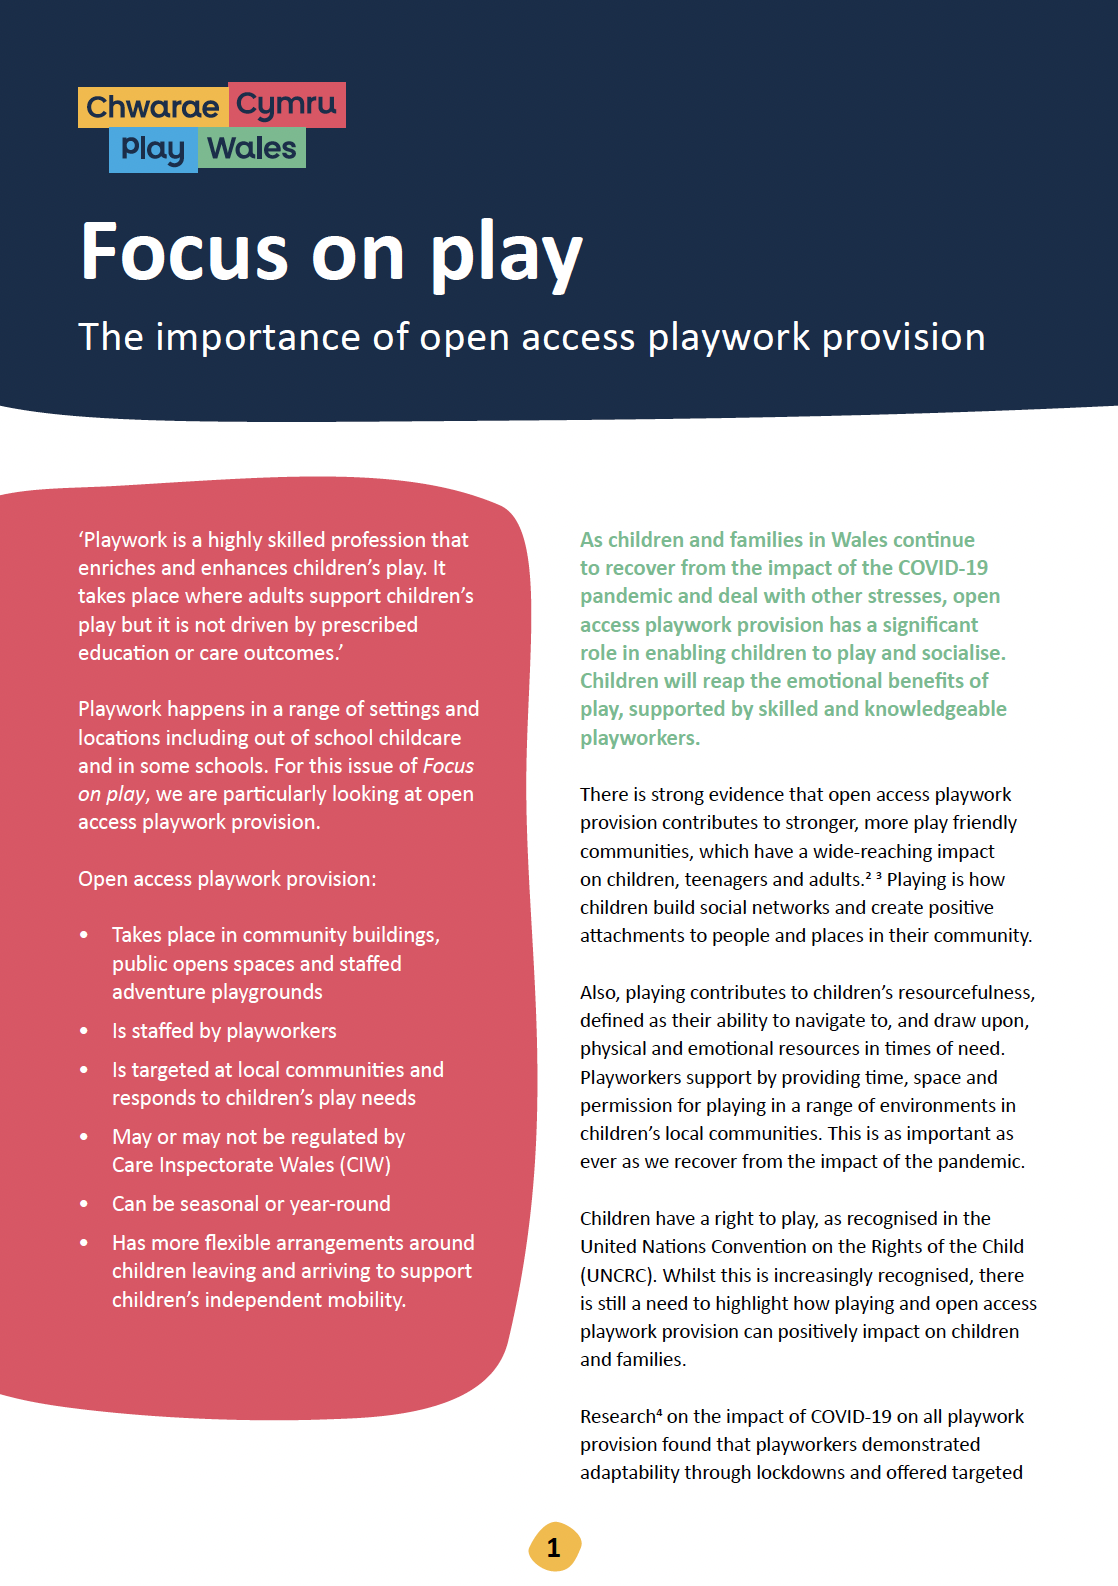 Focus on play – The importance of open access playwork provision